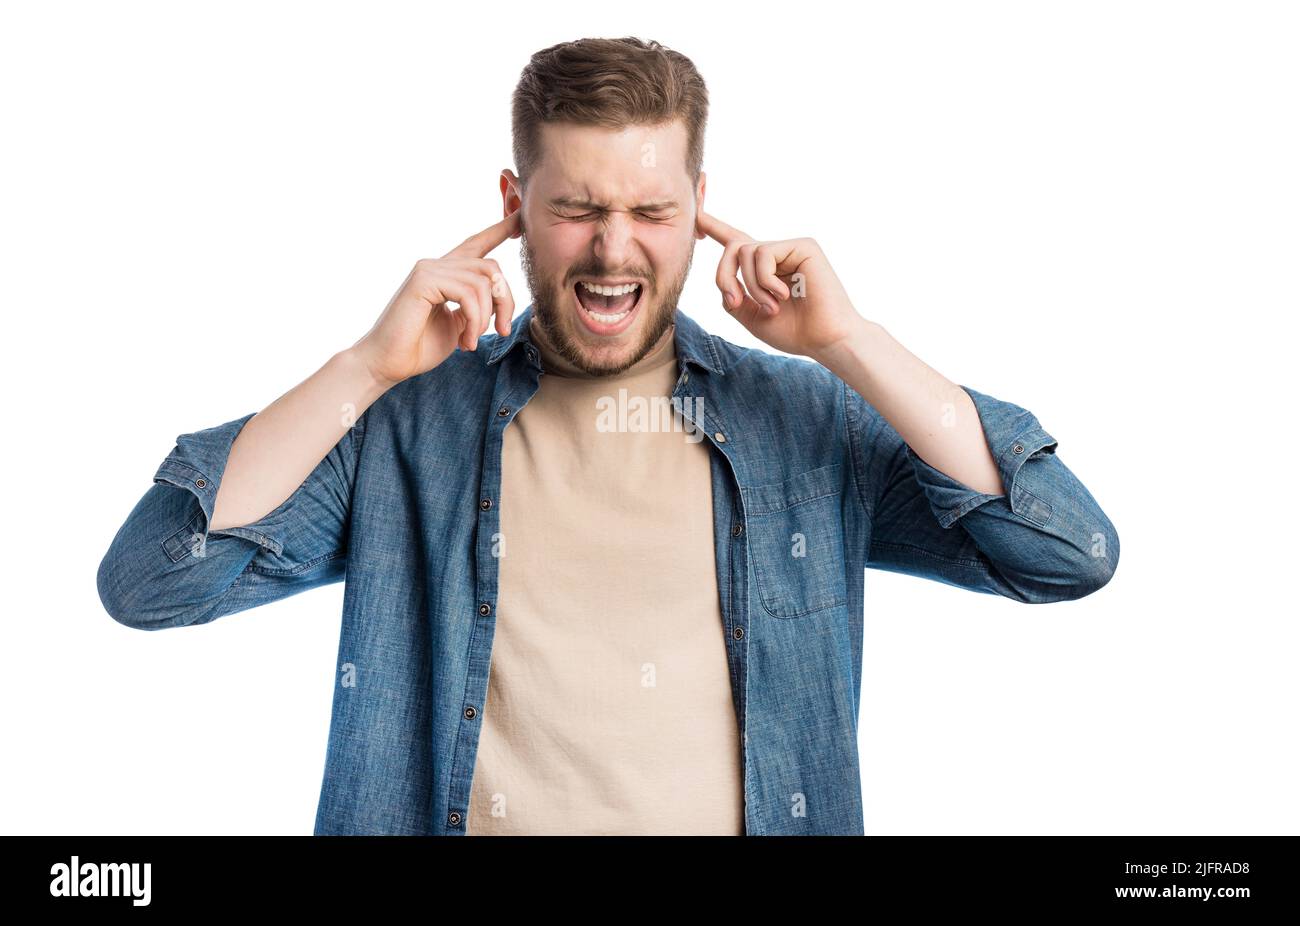 Annoyed man covering ears Stock Photo